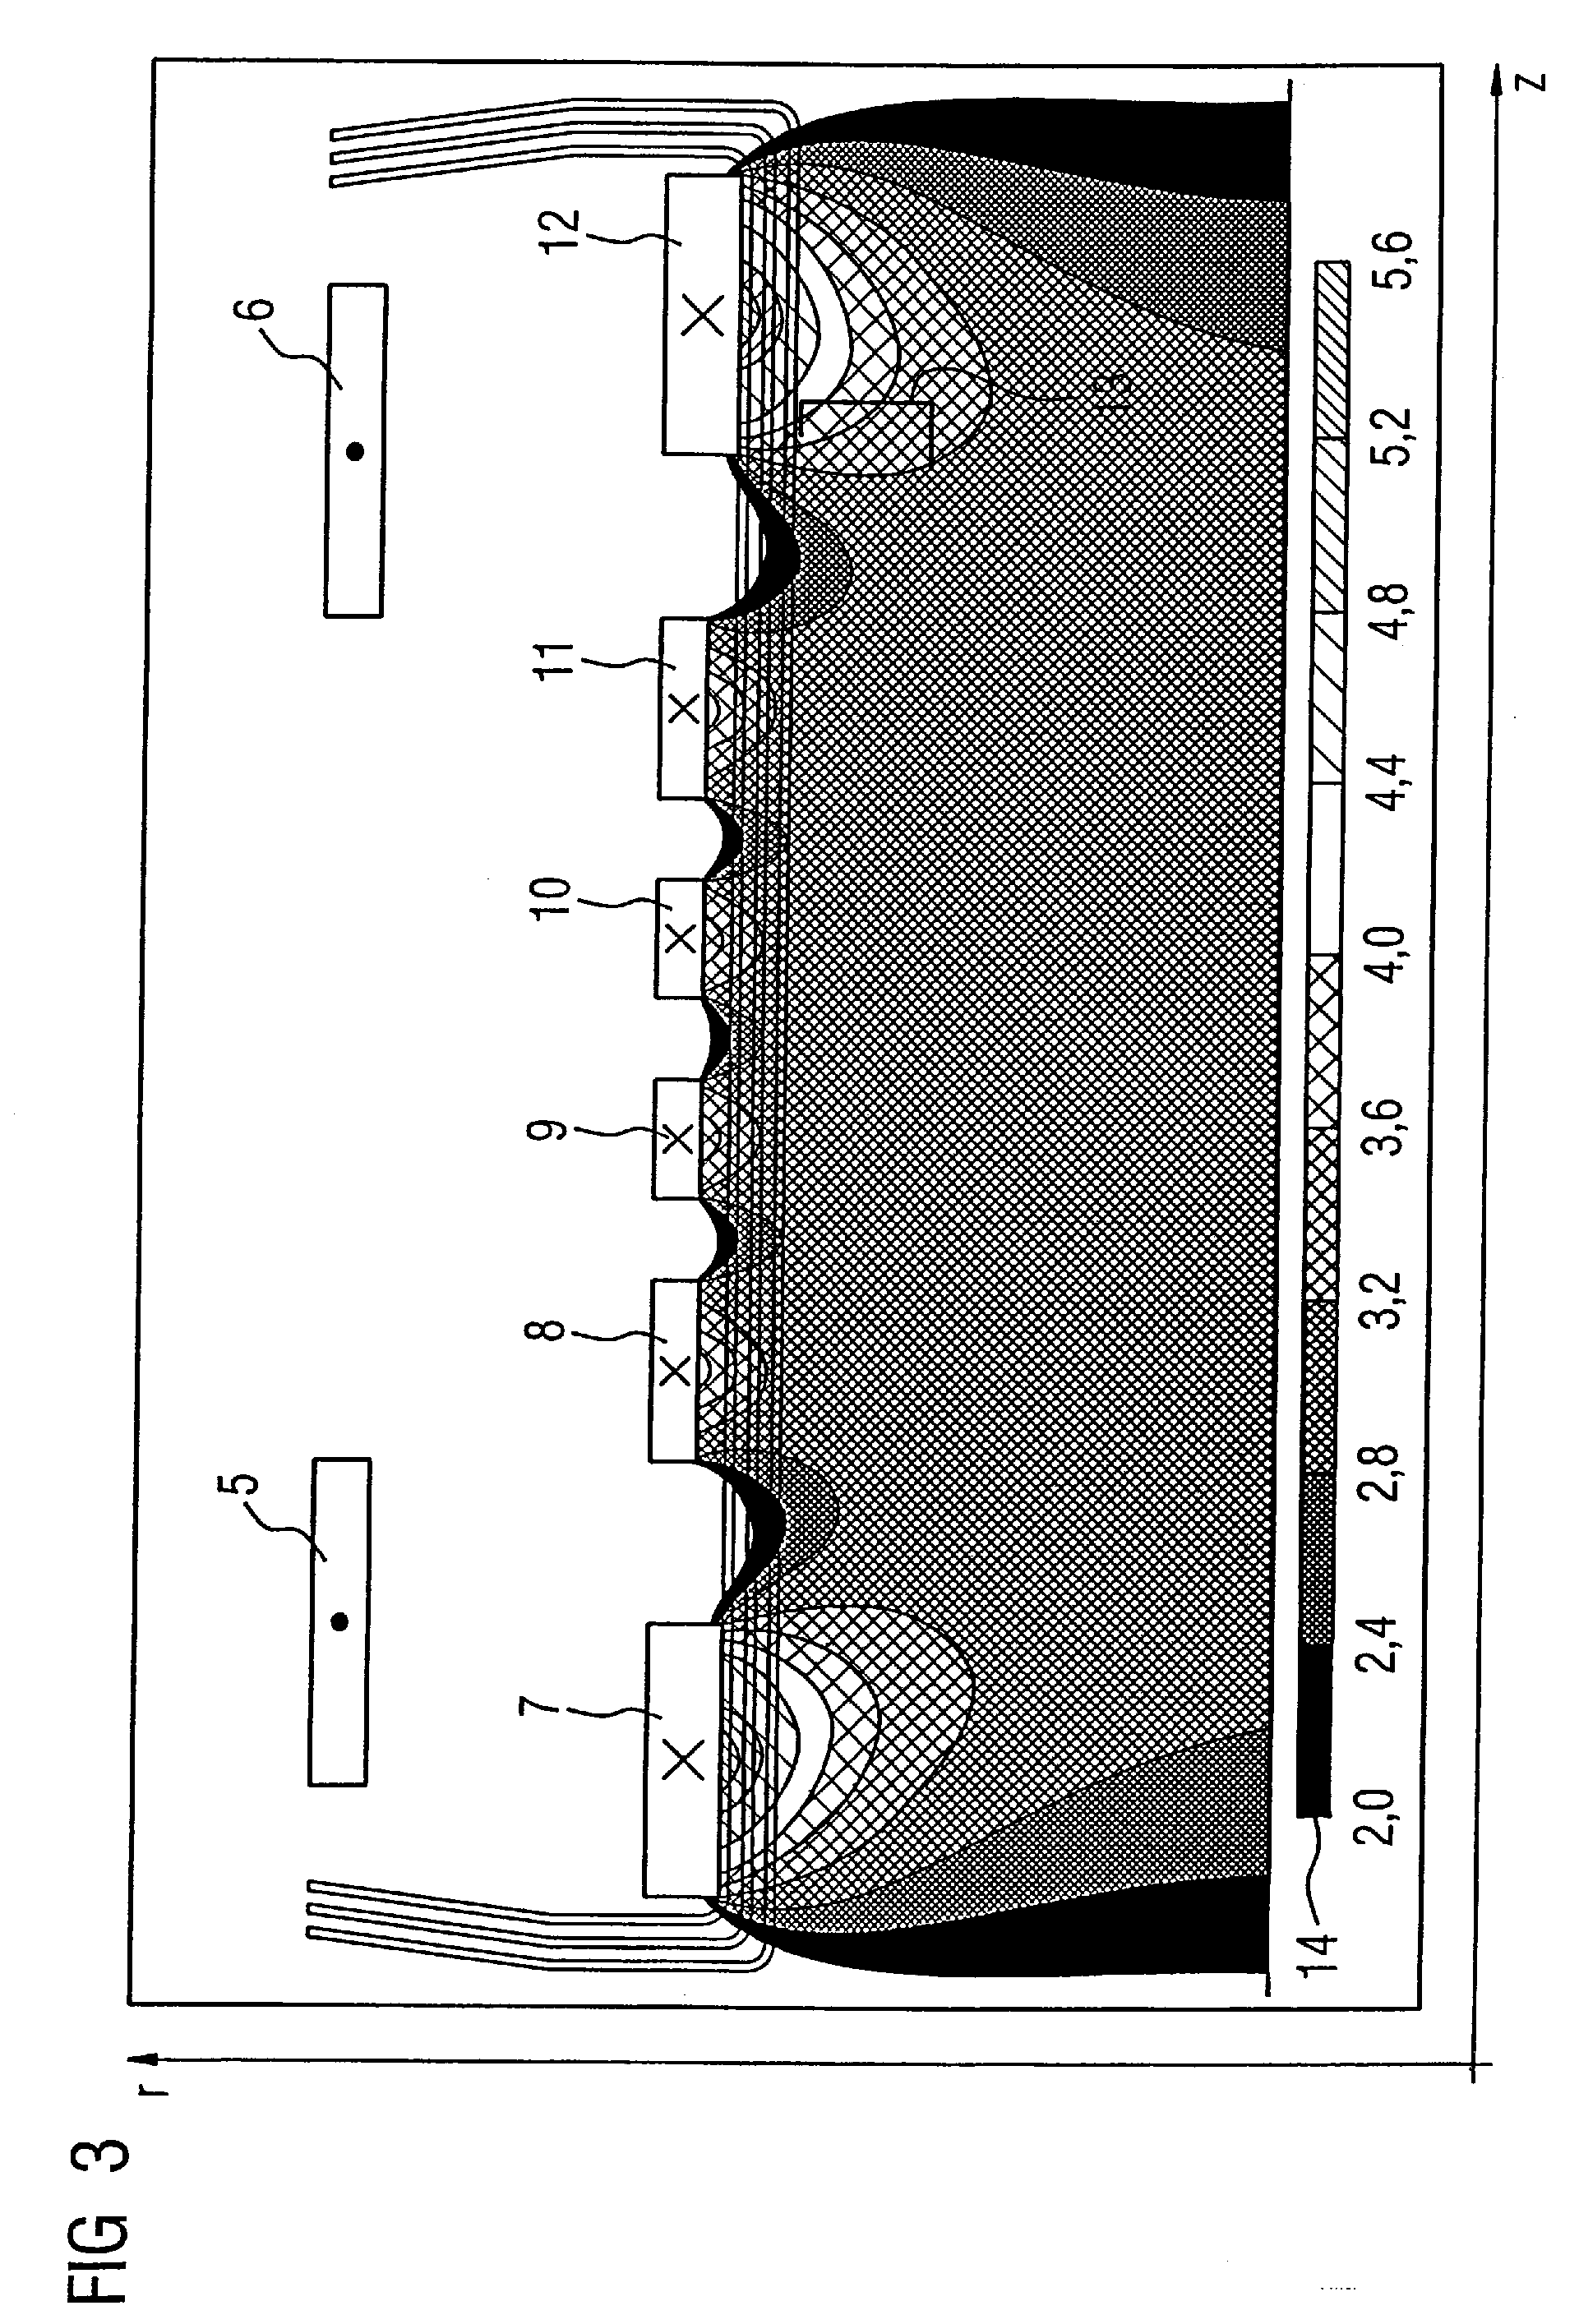 Method to determine the design of a basic magnet of a magnetic resonance apparatus with at least one gradient coil system